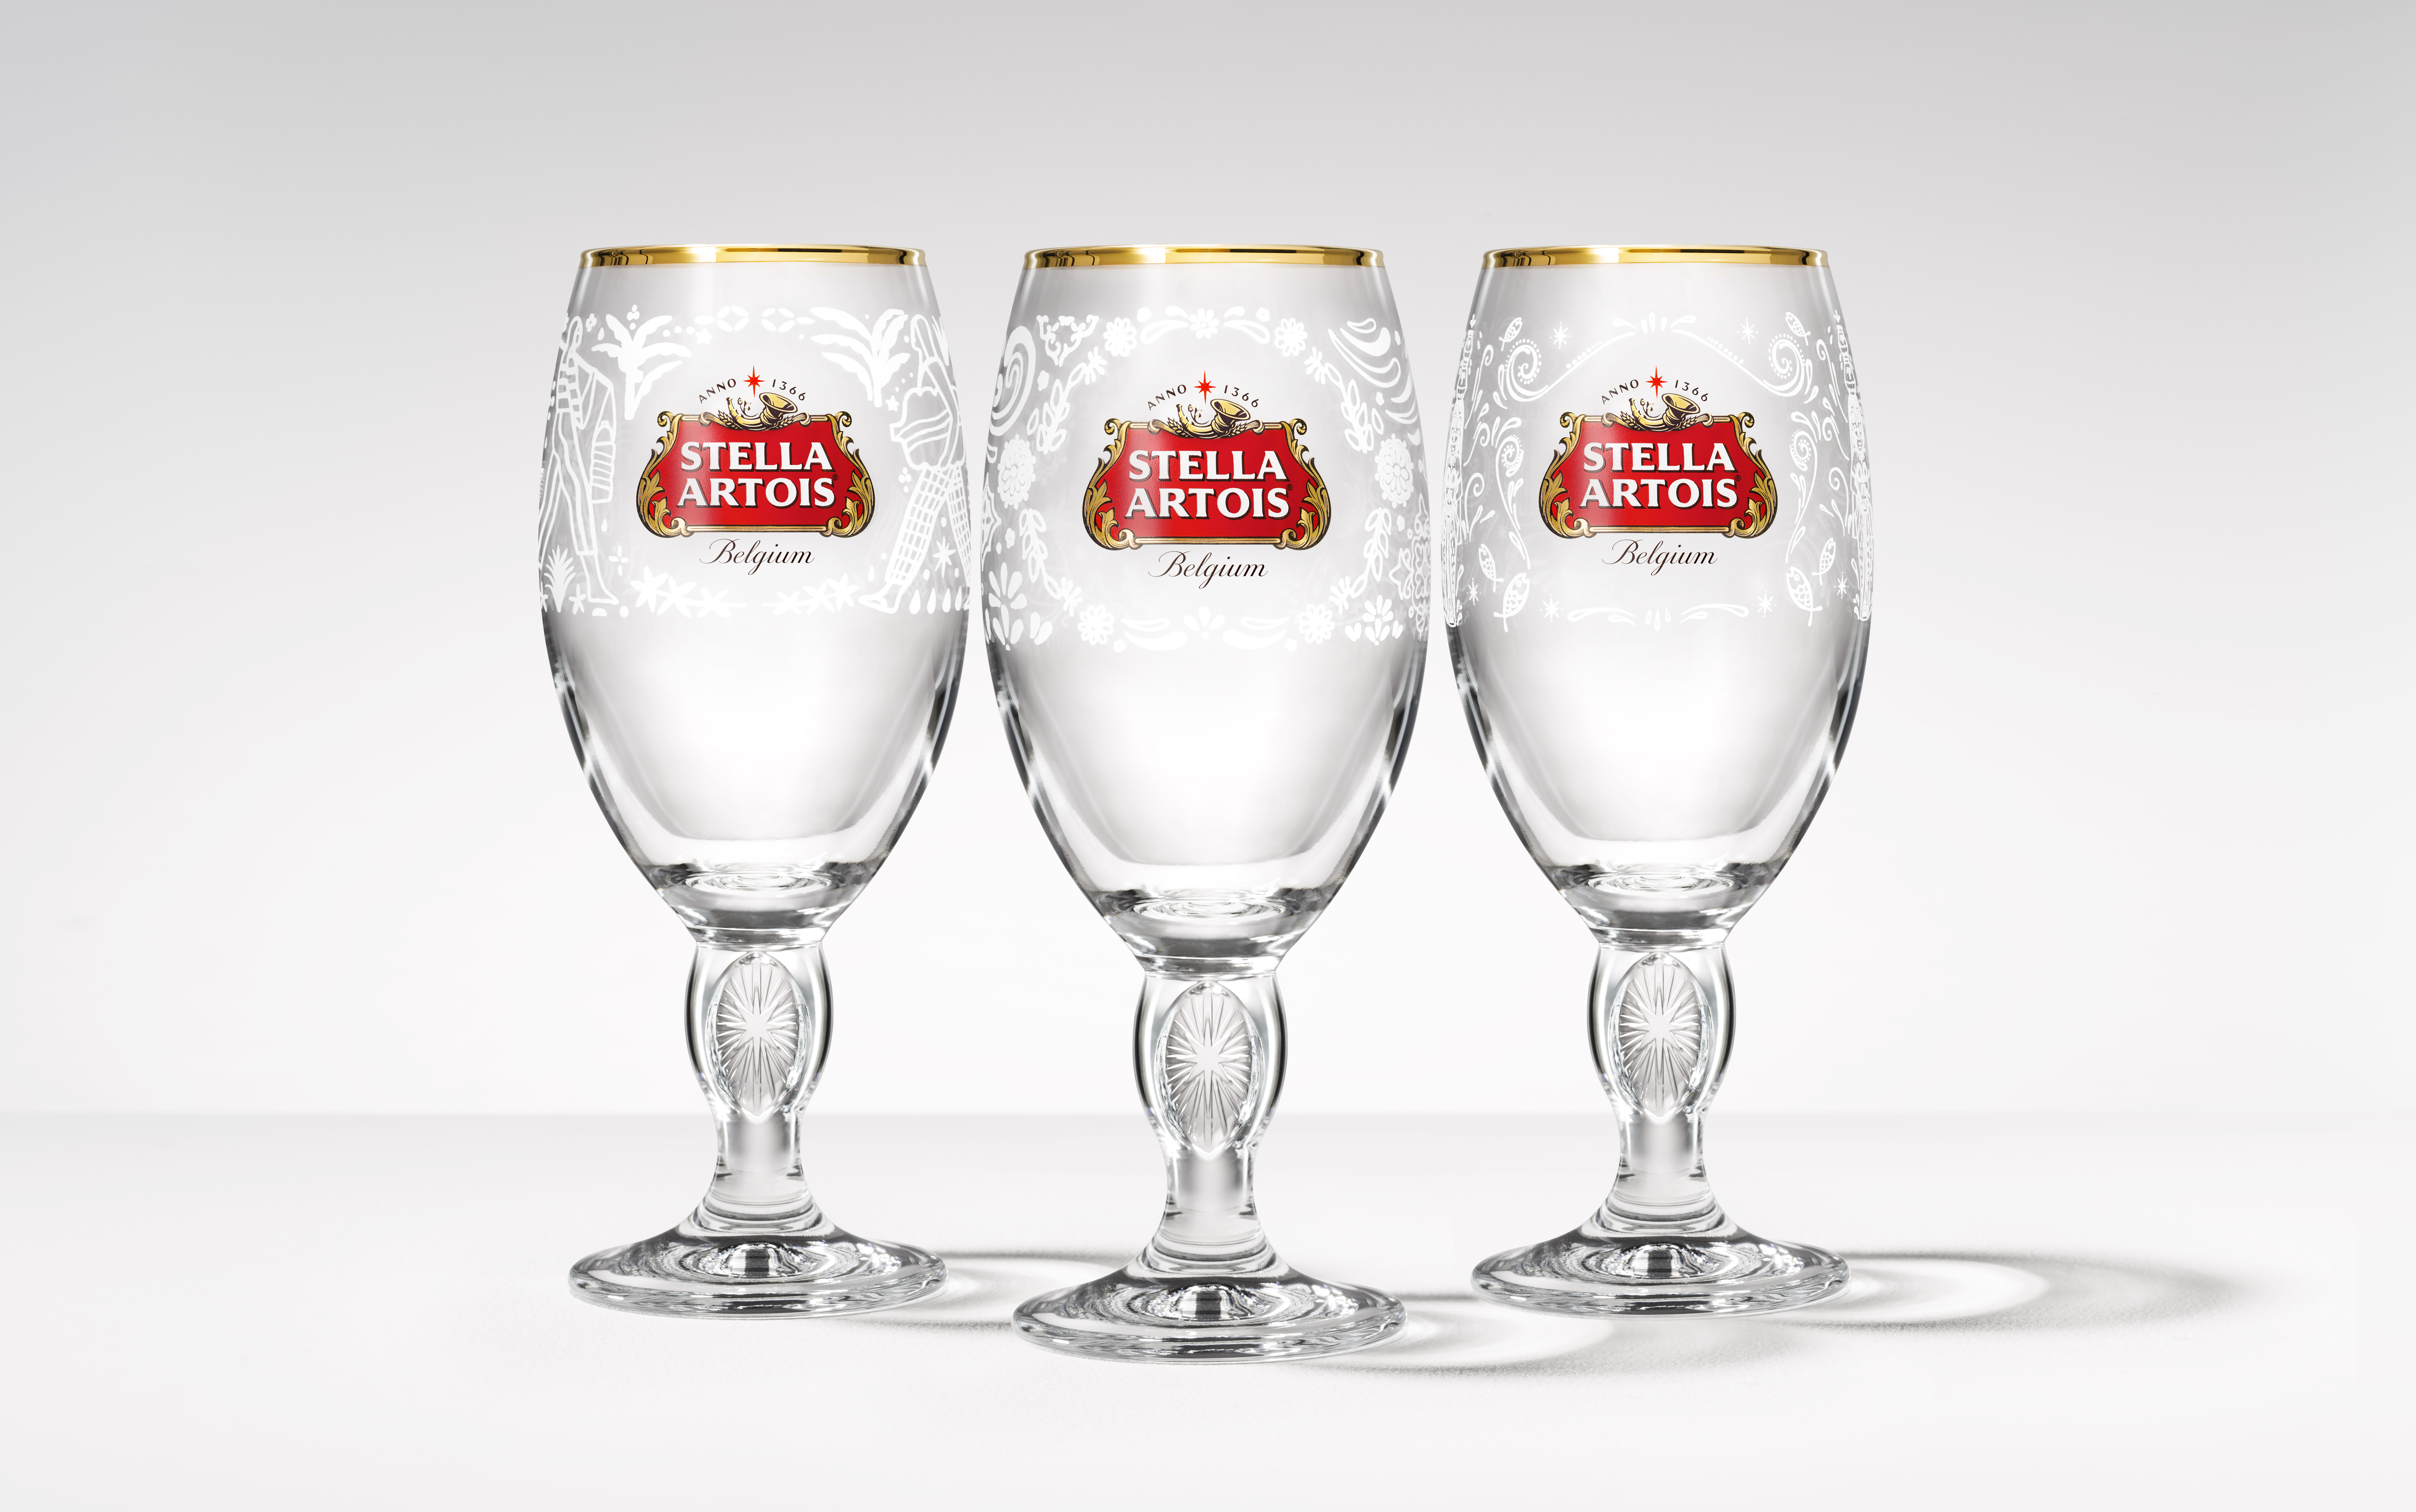 New Stella Artois Limited-Edition Chalices designed by artists from Mexico, India and the Philippines. The purchase of one Chalice helps Water.org provide five years of clean water to one person in the developing world.